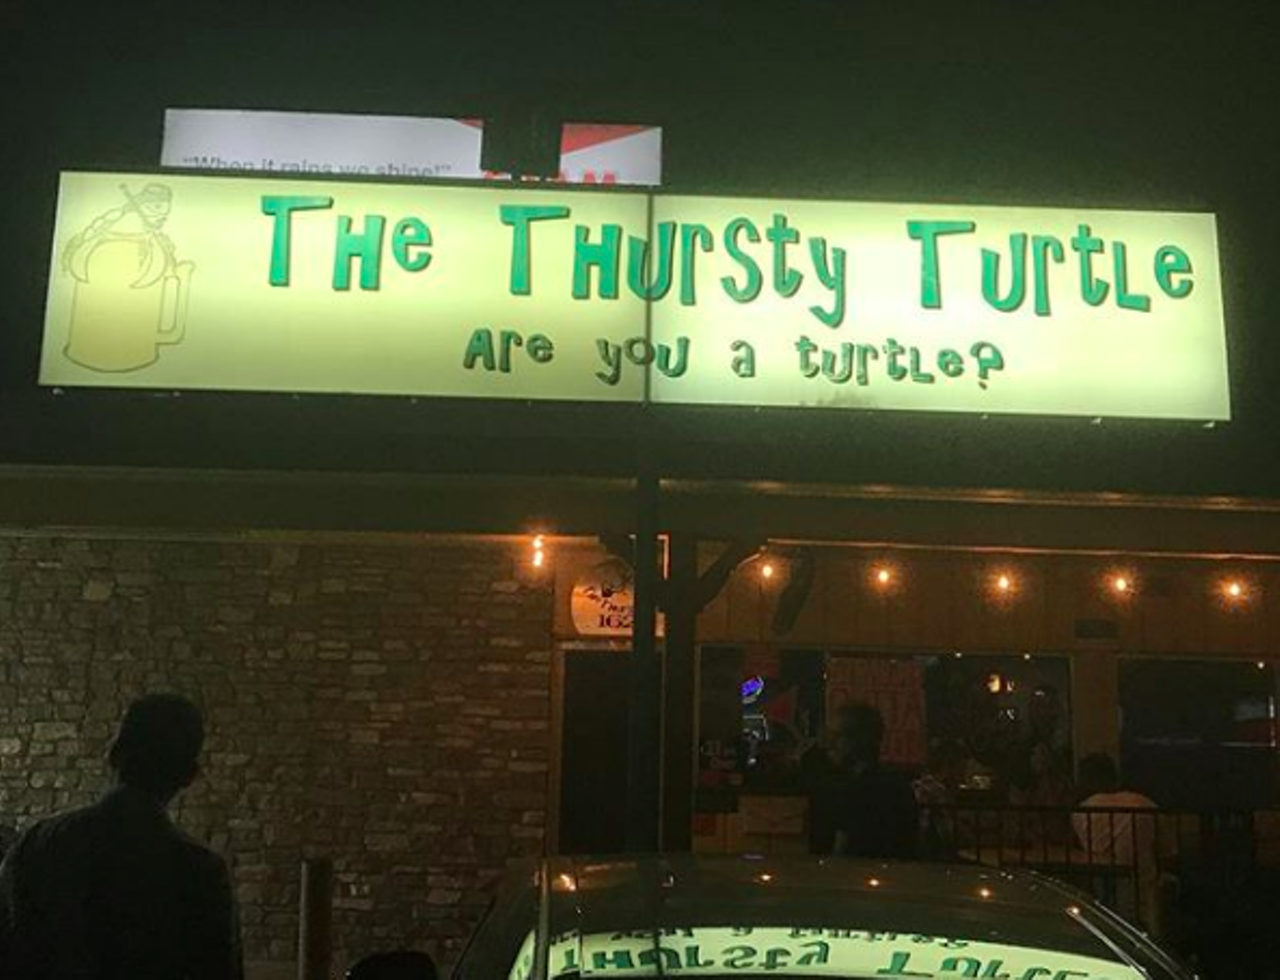 The Thursty Turtle
1626 NE Interstate 410 Loop, (210) 820-3600, facebook.com/TheThurstyTurtle
Come for the drinks, stay for the giant-ass turtle shell encased on the wall. Or maybe, stay for the popcorn? Consider this your push to hit up this chill bar, where you can choose from chilling on the couches and maybe playing a game of giant Jenga, to playing pool on the other side of the bar. For all the divey goodness we love, hit up Thursty Turtle.
Photo via Instagram / jonwiener